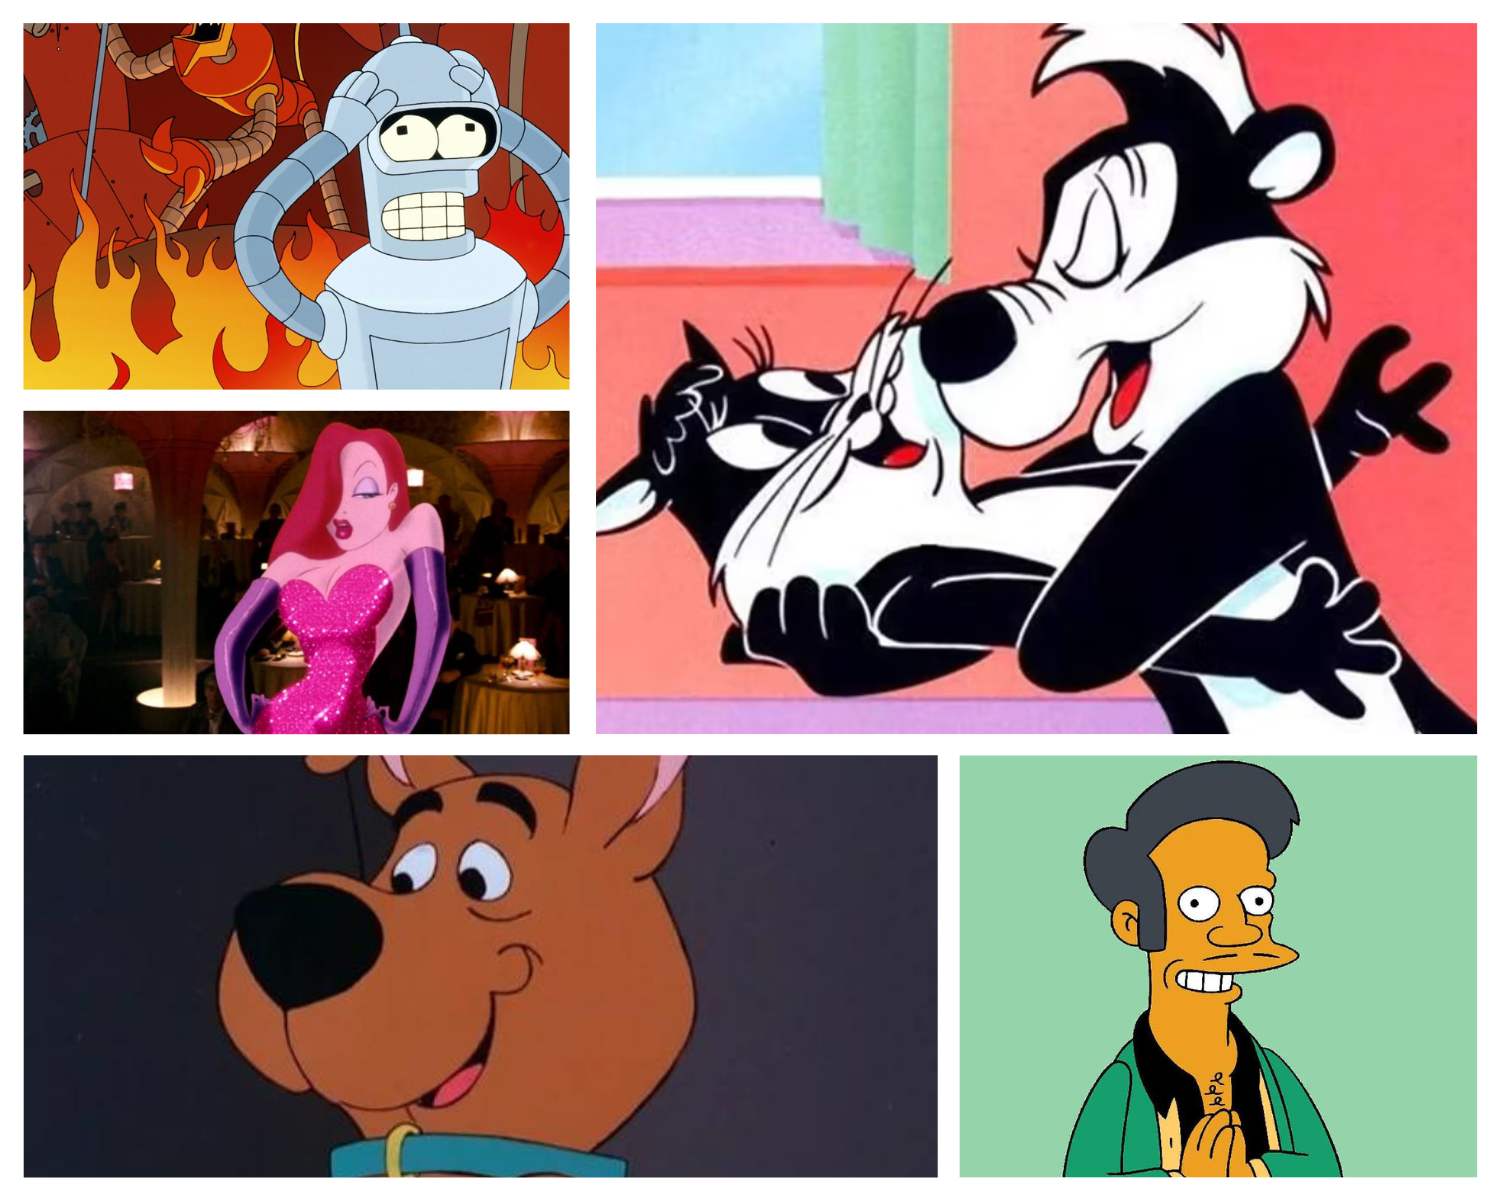 Controversial Characters in Cartoons